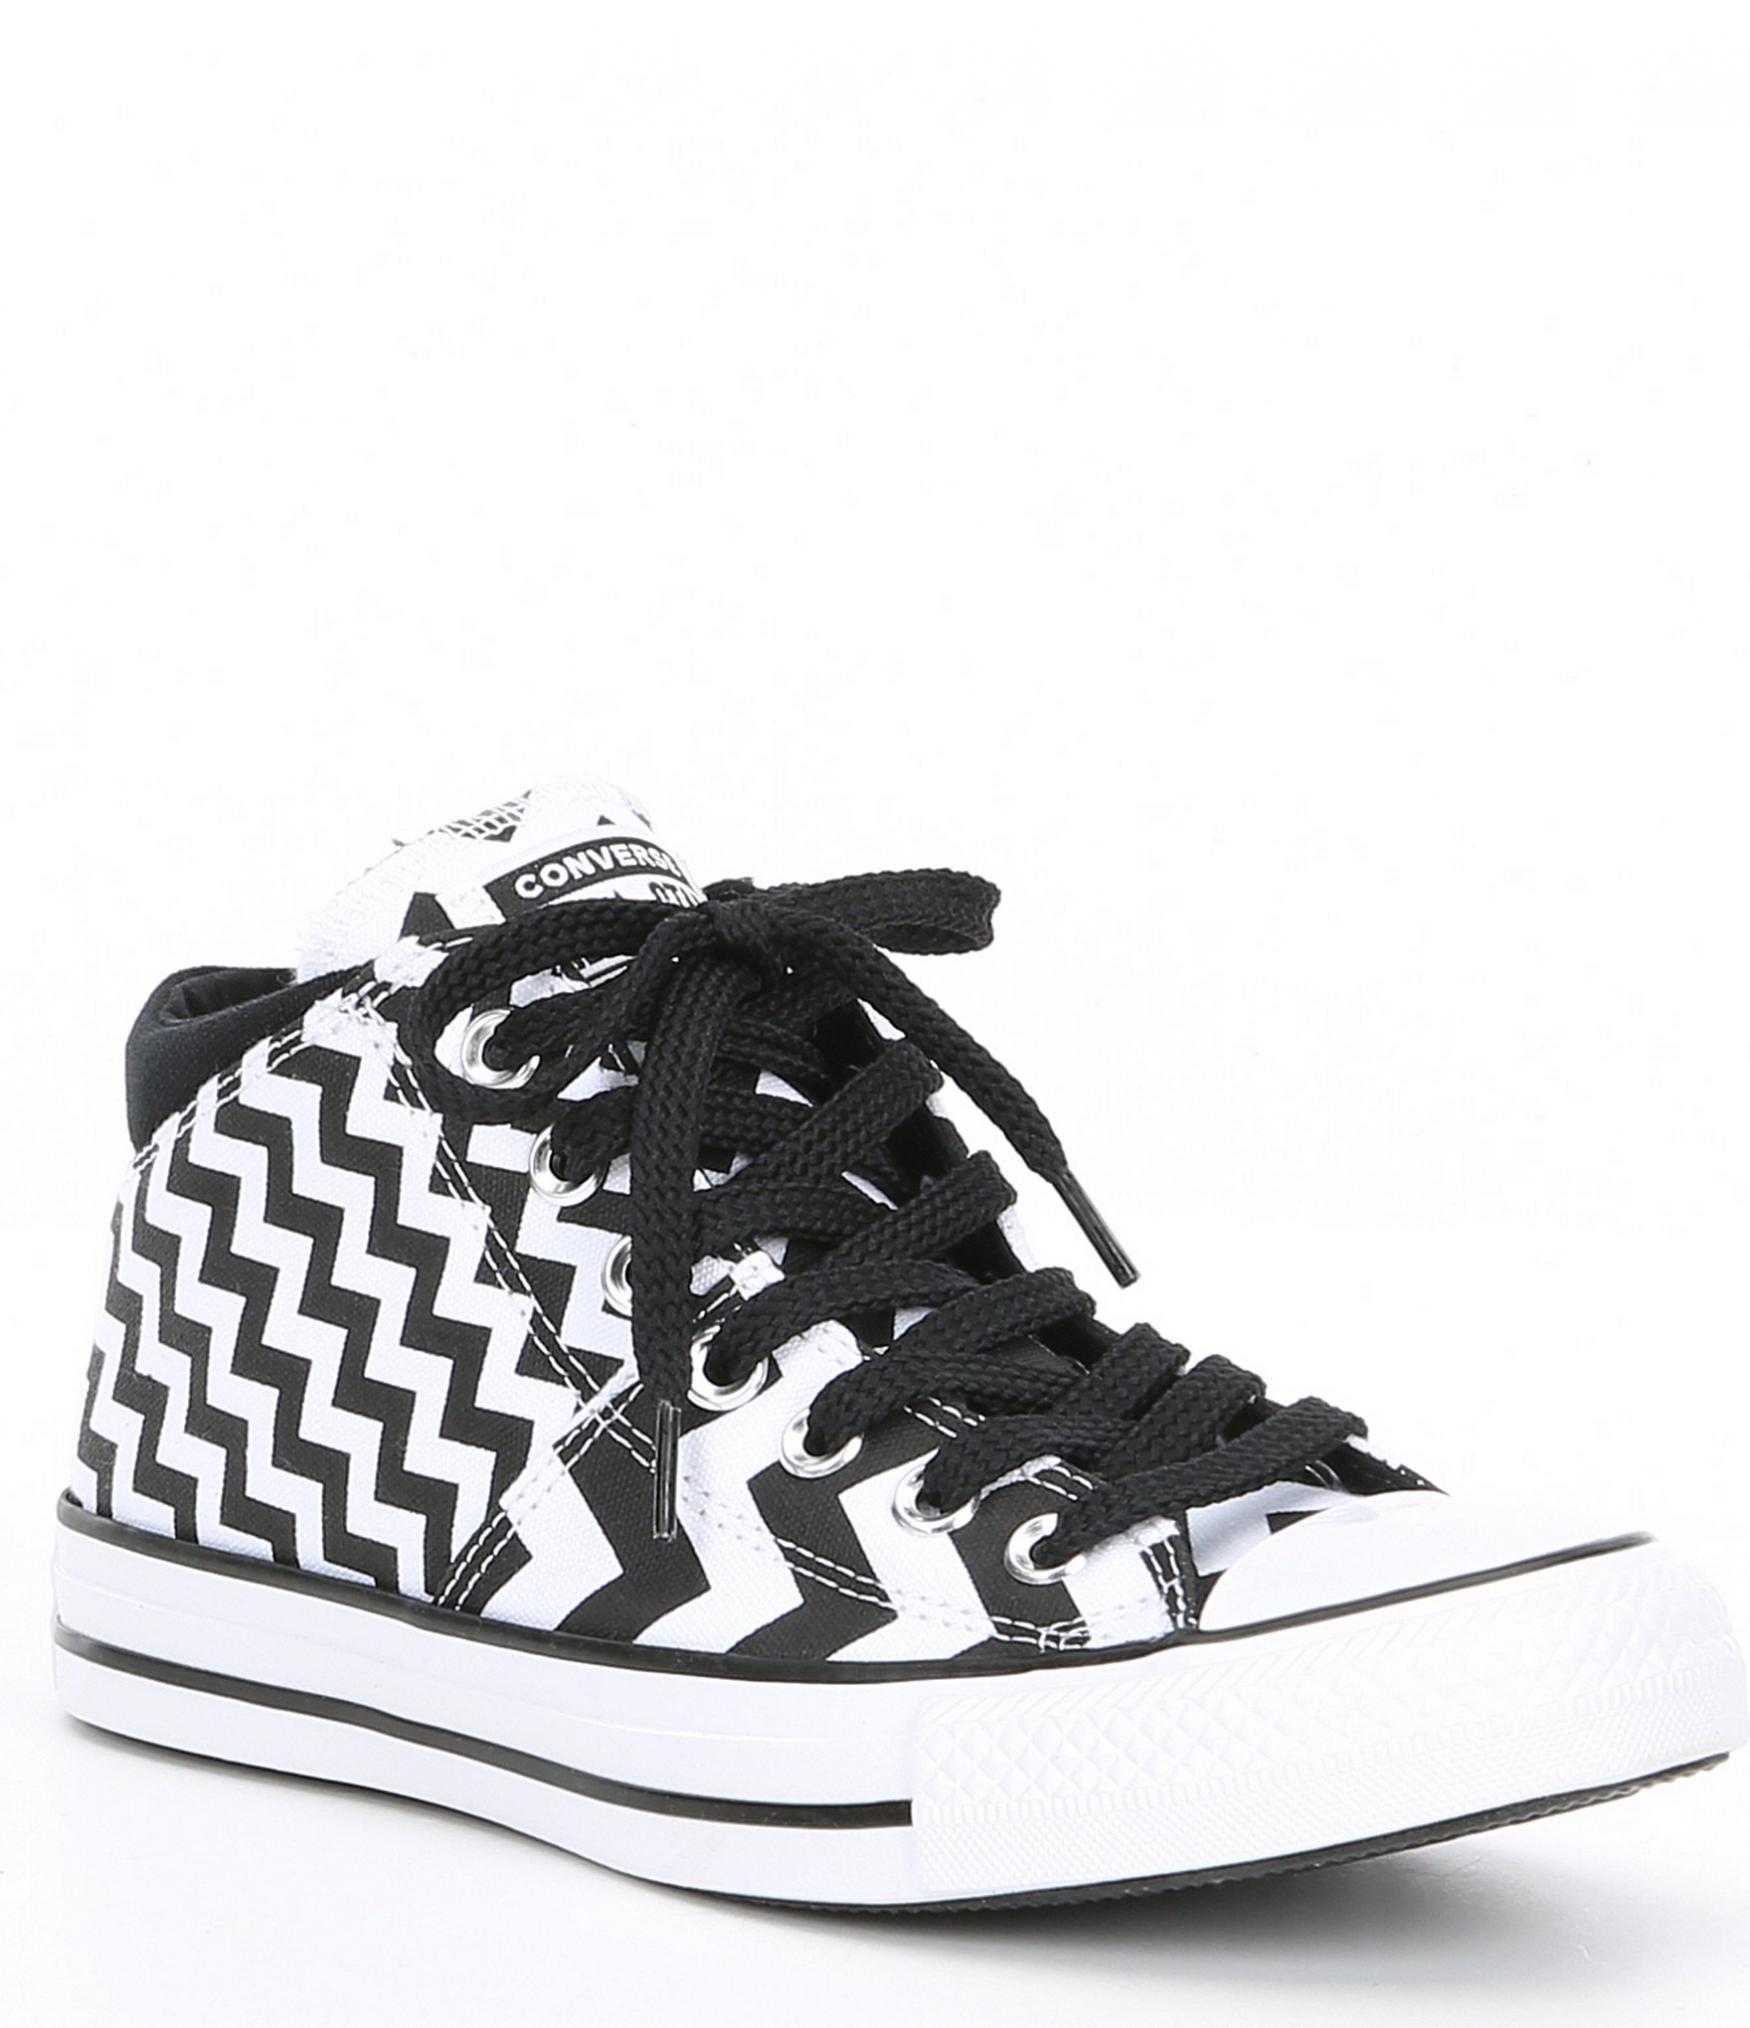 Sneakers | Women's Chuck Taylor All Star Madison Chevron Printed ... ناشي